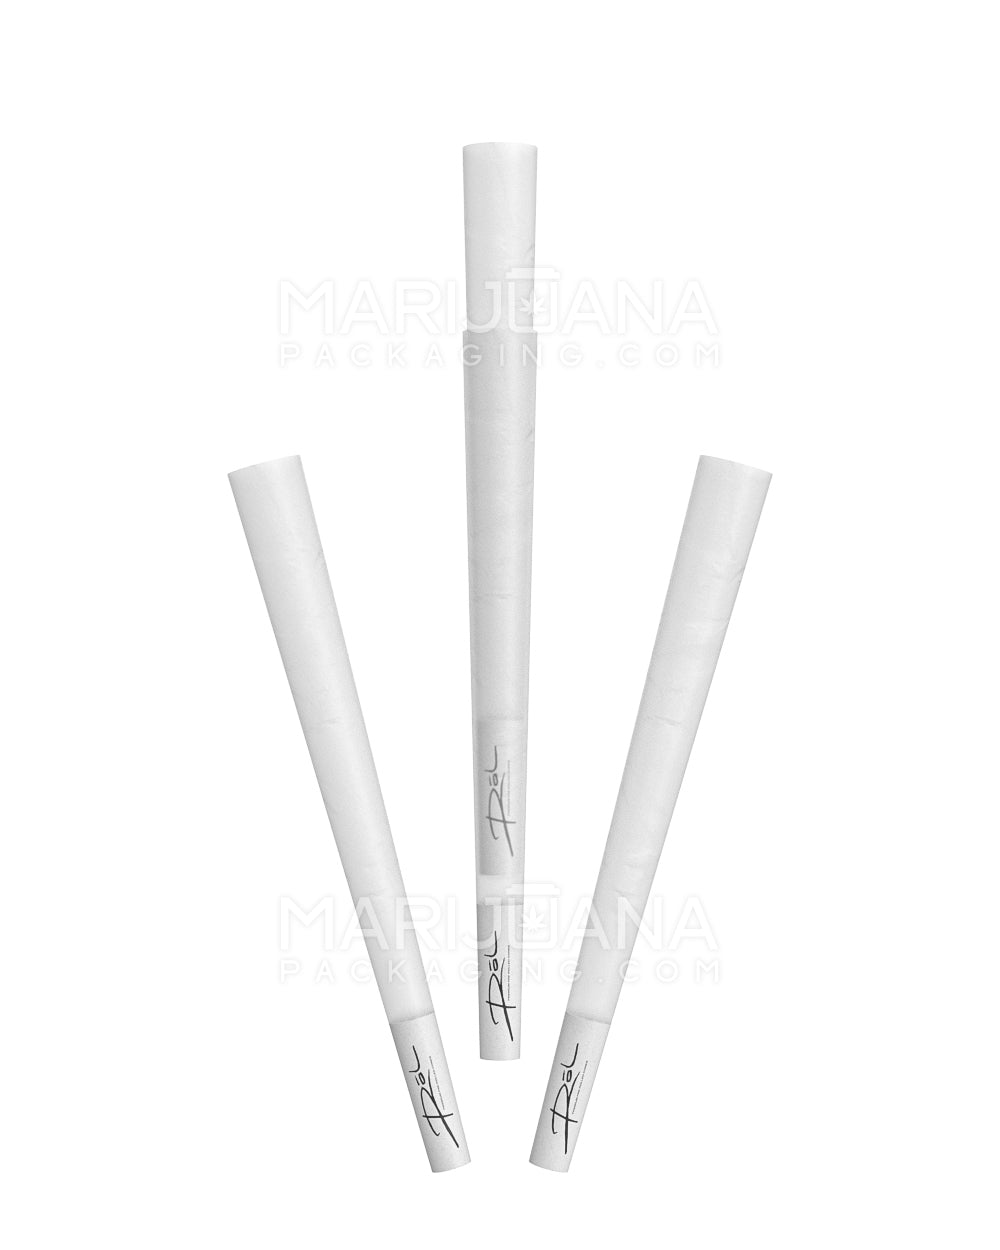 RōL | 98 Special Size Pre-Rolled Cones | 98mm - Porcelain White Paper - 800 Count